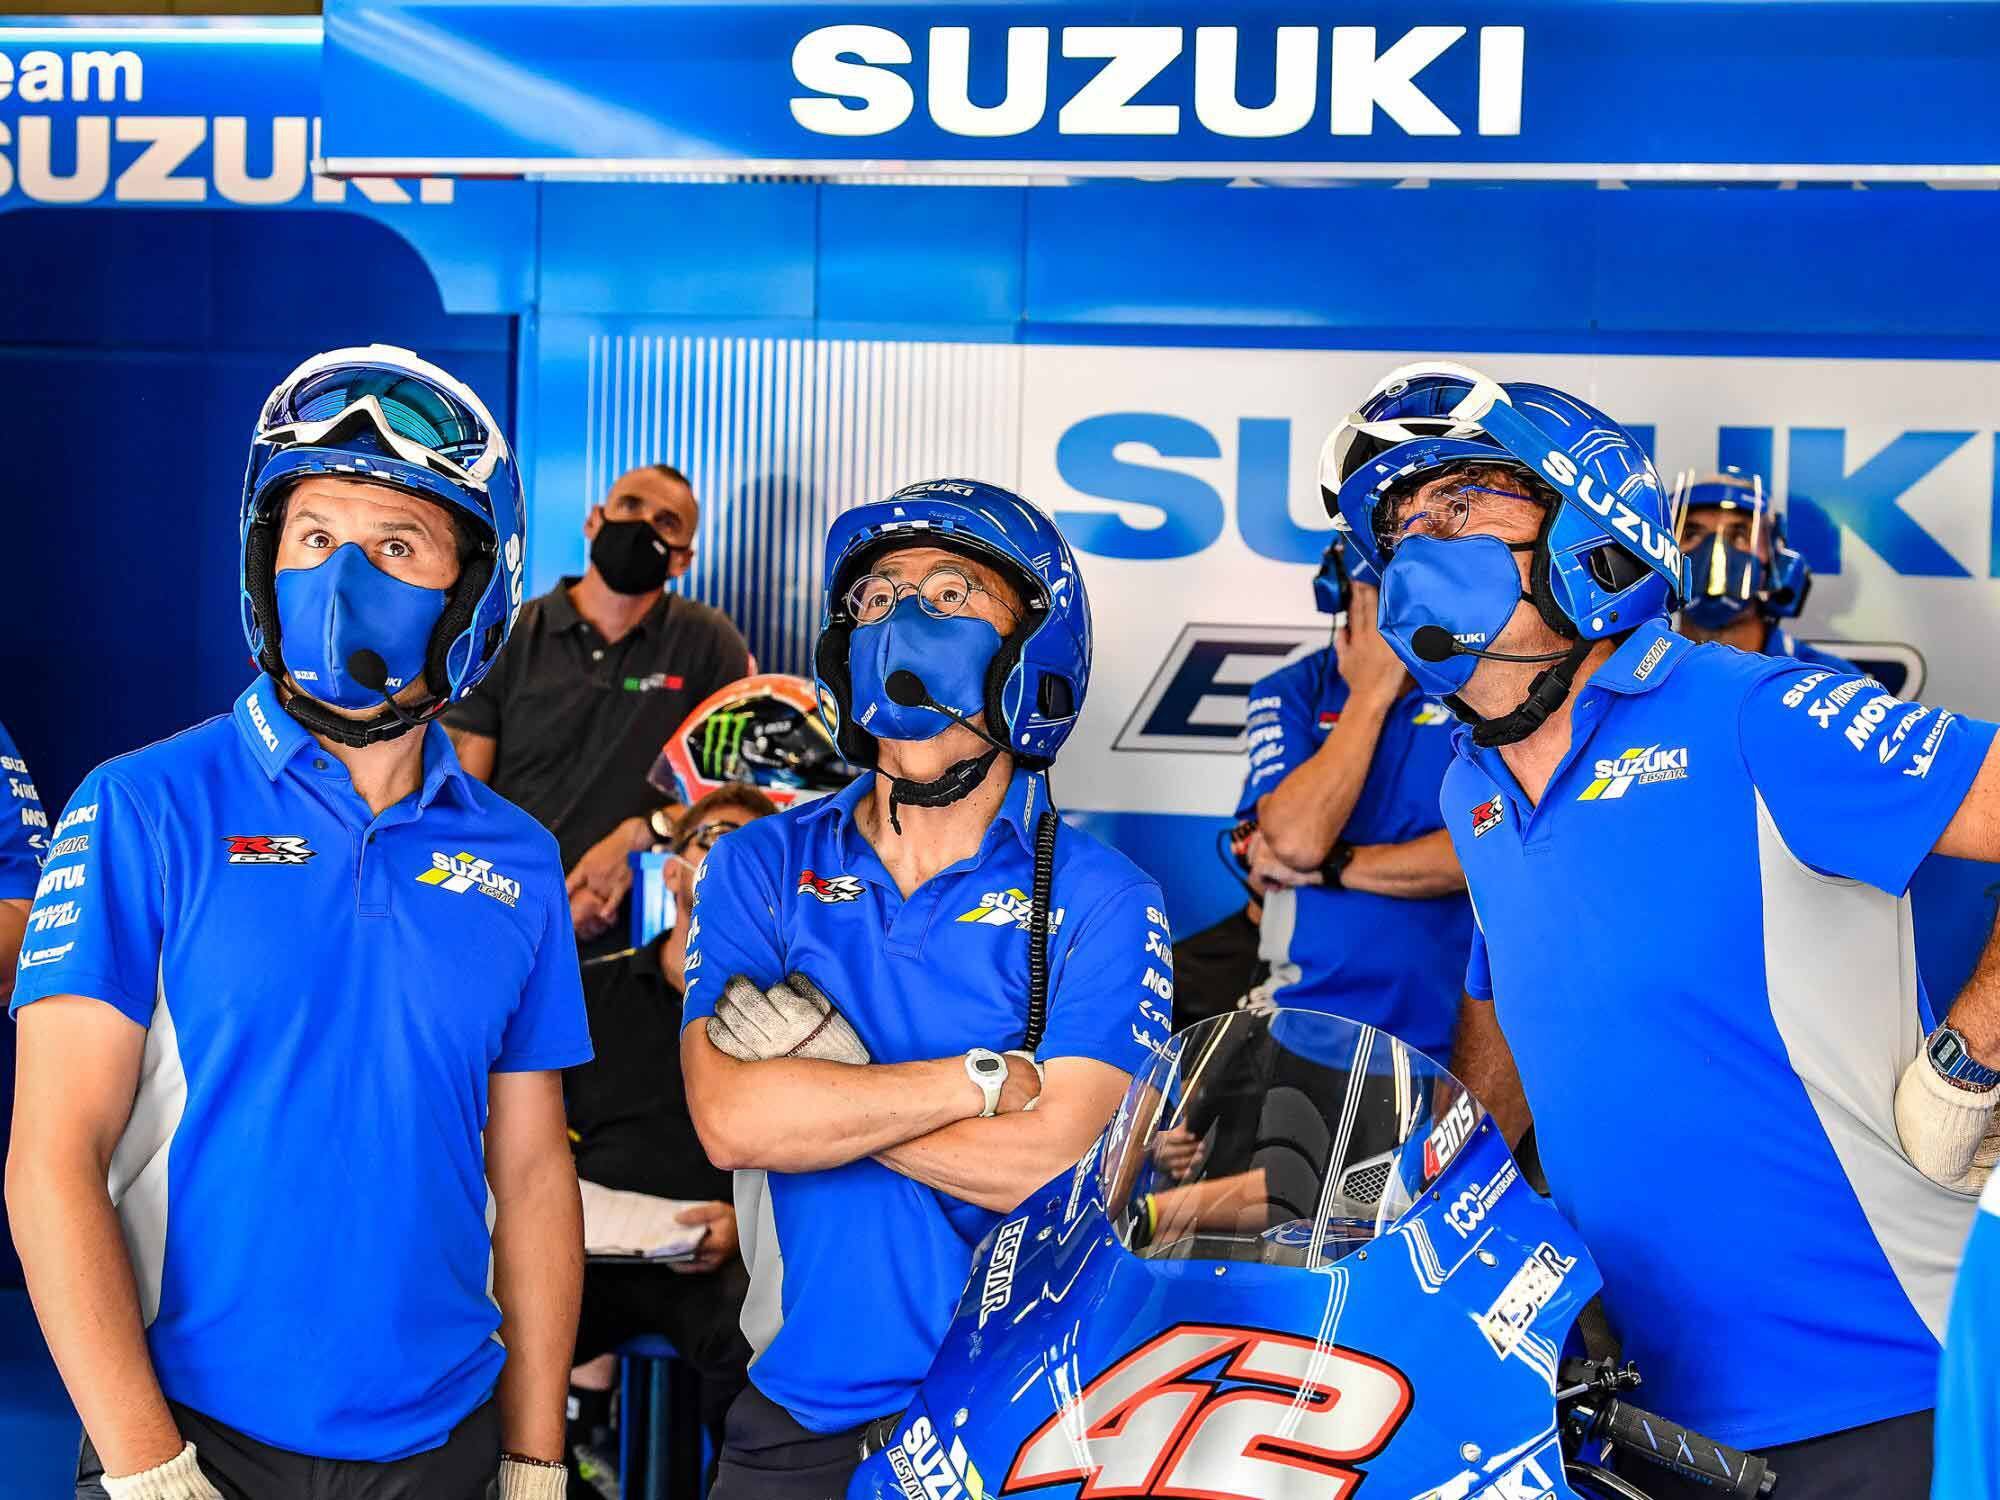 Brivio has assembled a team that is motivated and all-in on Suzuki.